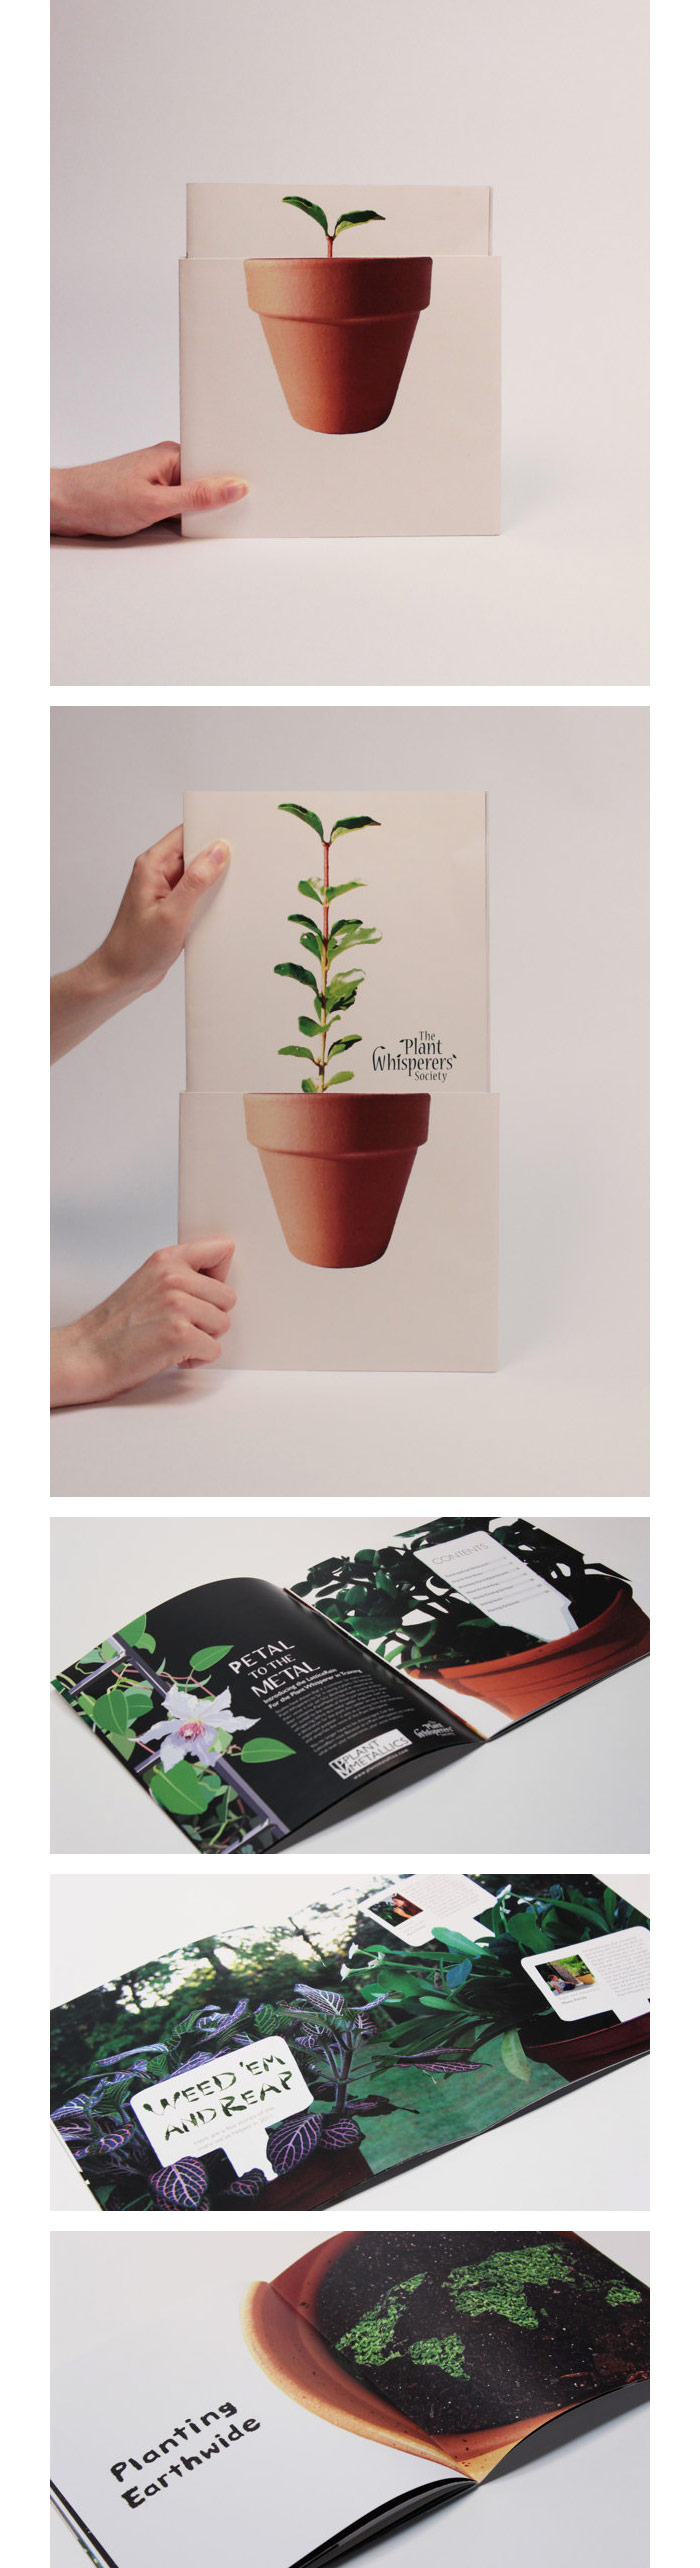 Jenna Russell / Annual Report concept - The Plant Whisperers Society